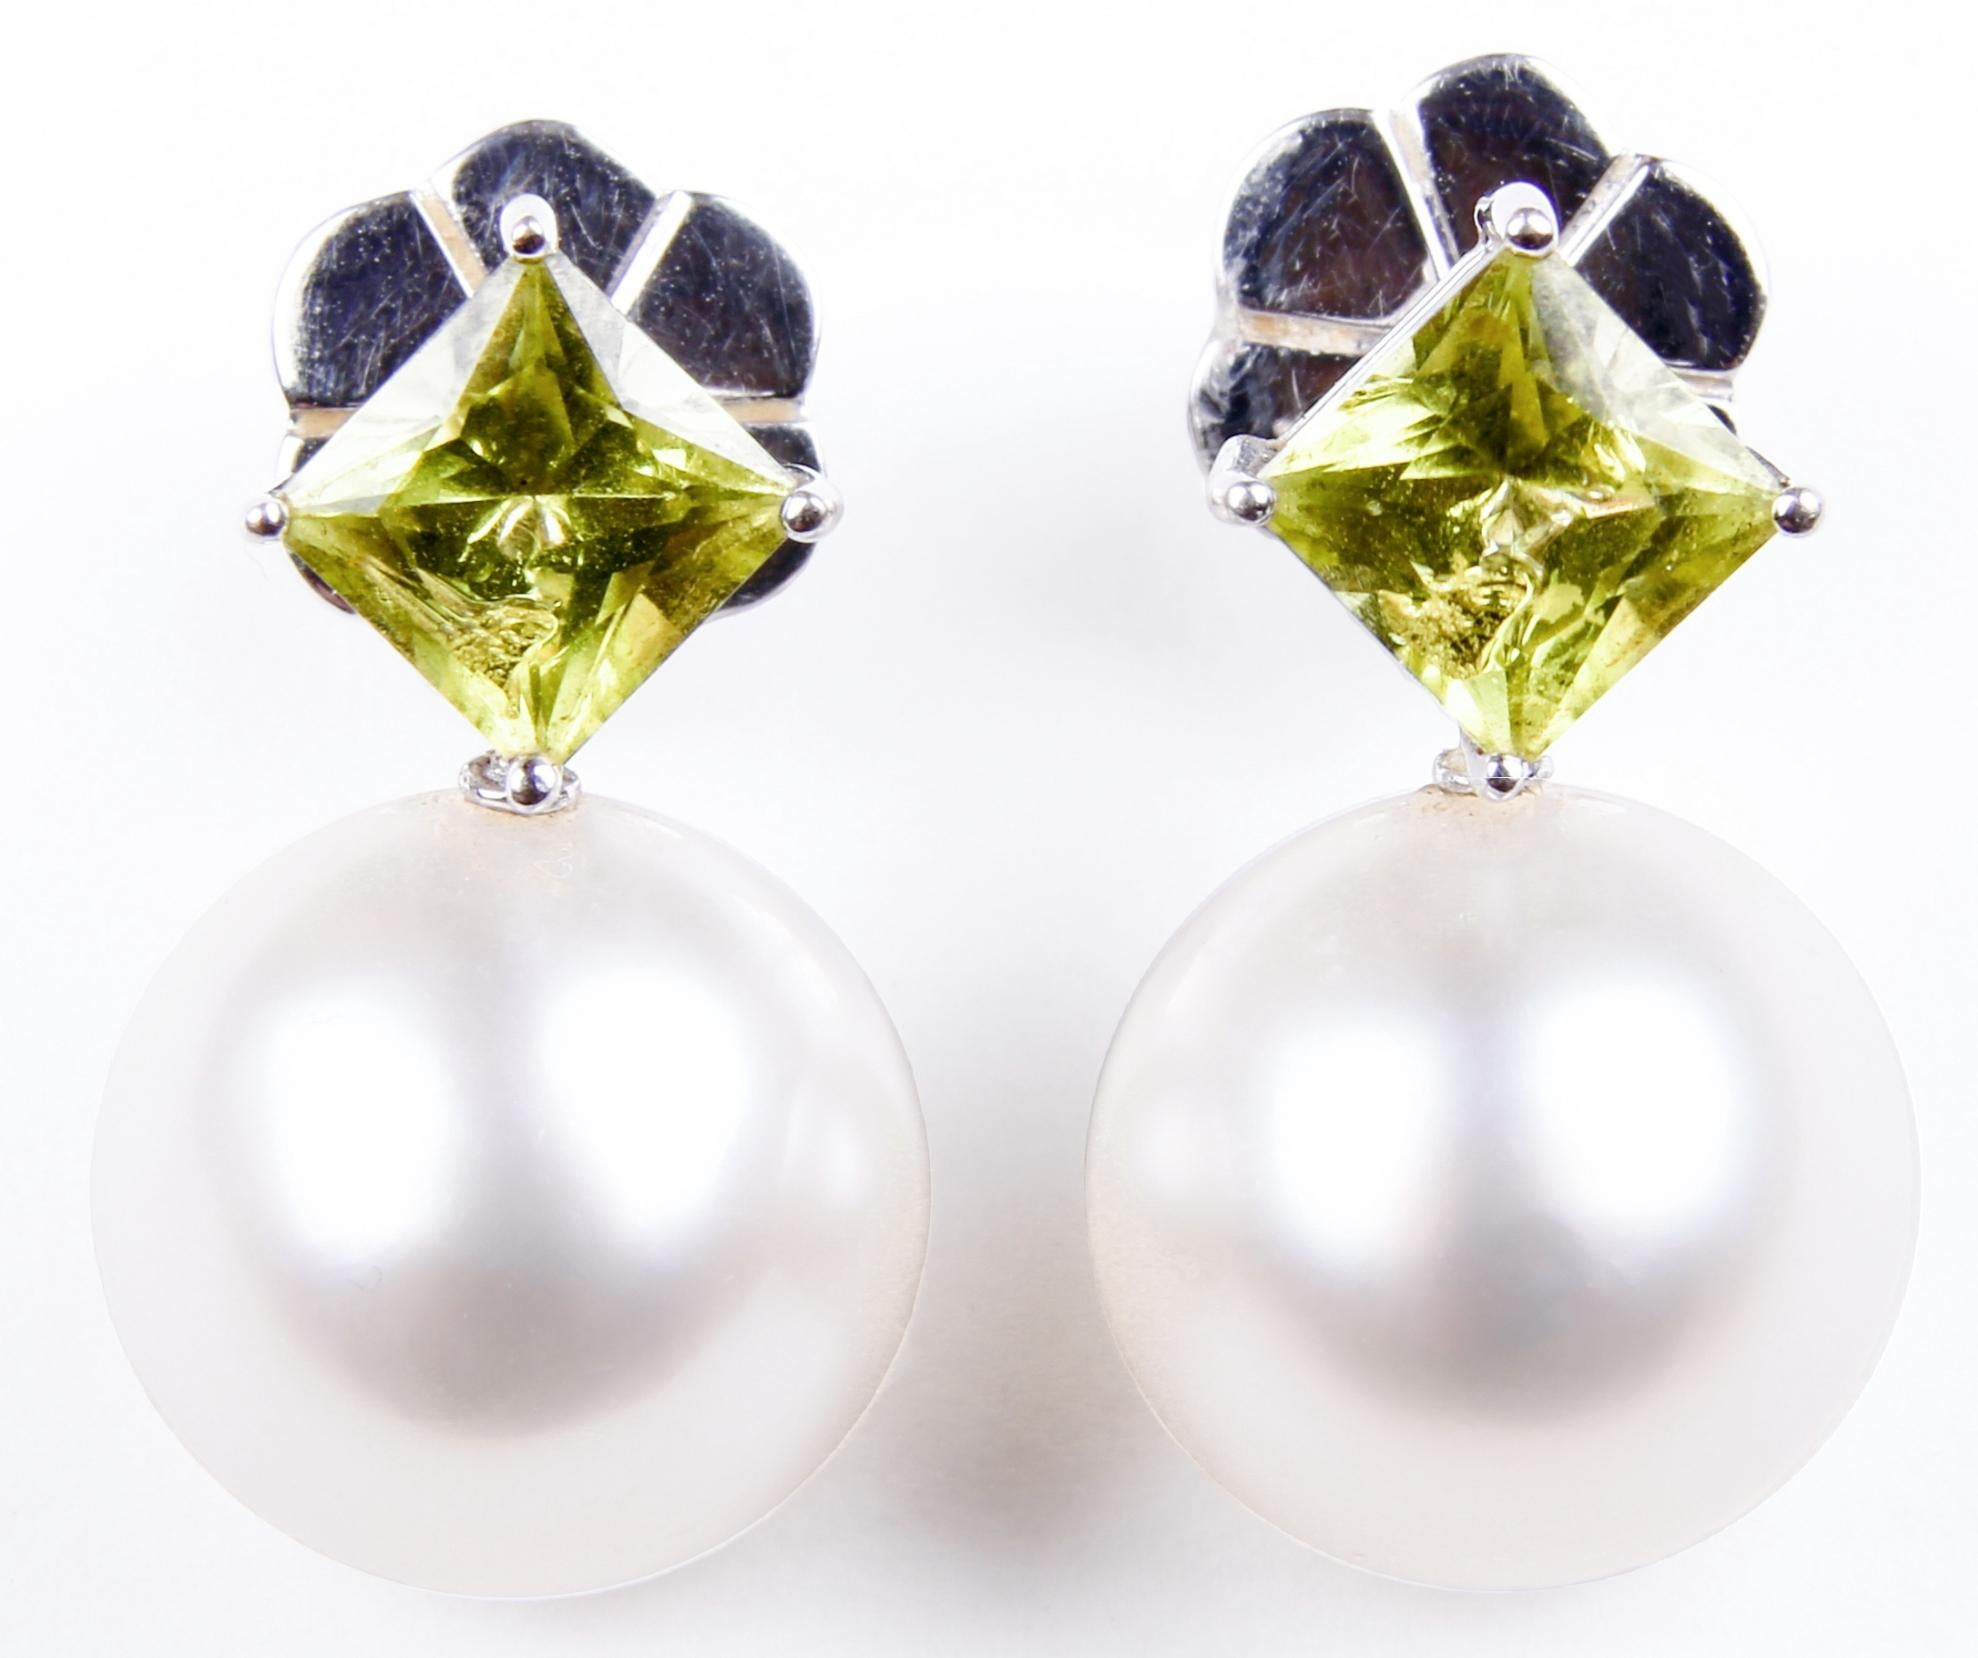 This is a stunning pair of earrings created by the exclusive award winning Australian jewellers Autore. The earrings each feature a cultured South Sea pearl and a green peridot. The metal is 18 karat white gold, as signified by the 750 stamp on the